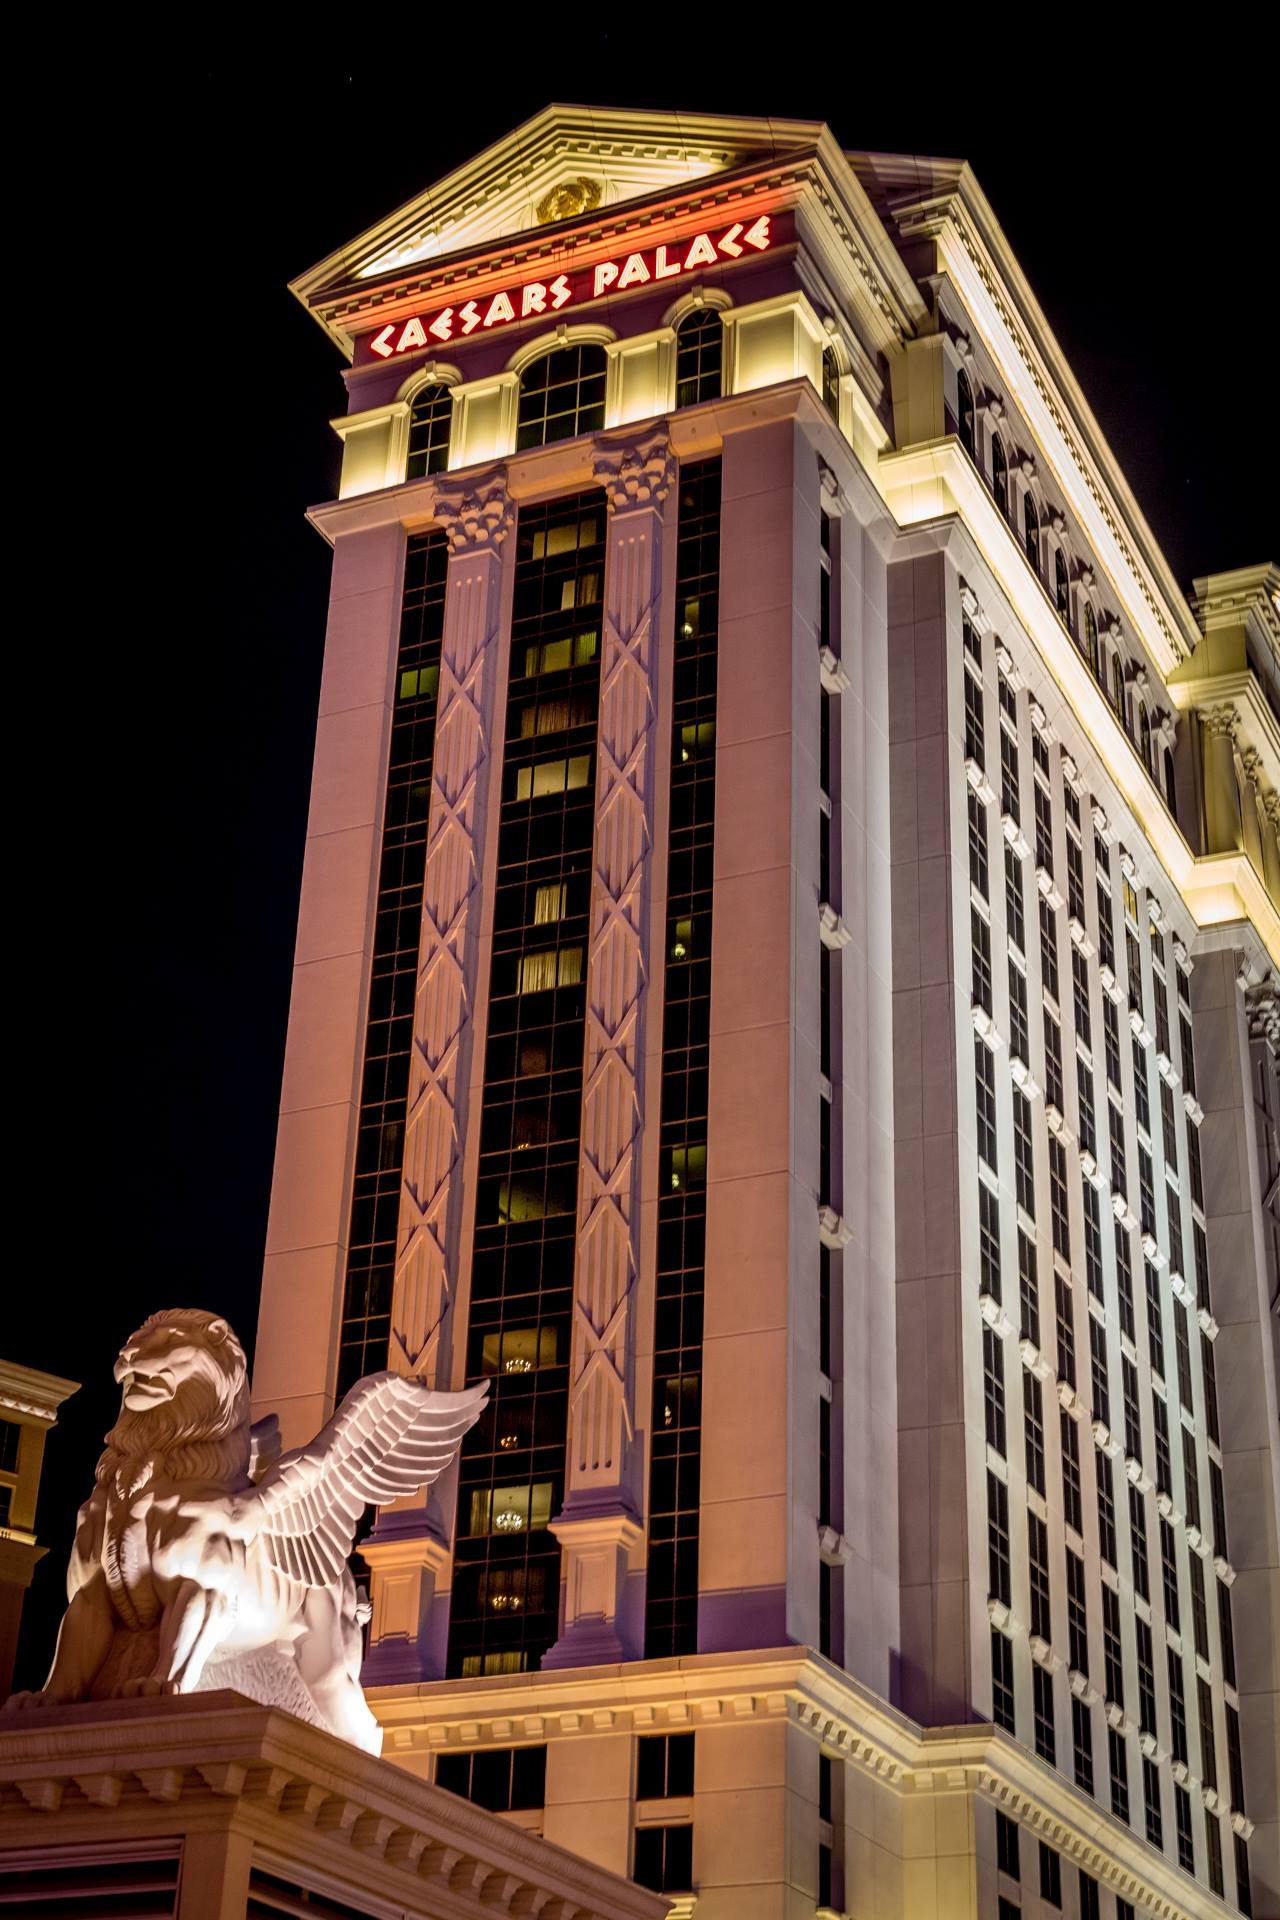 Ceasar's Palace Ceasar's Palace in Las Vegas, Nevada. by Scott Smith Photos